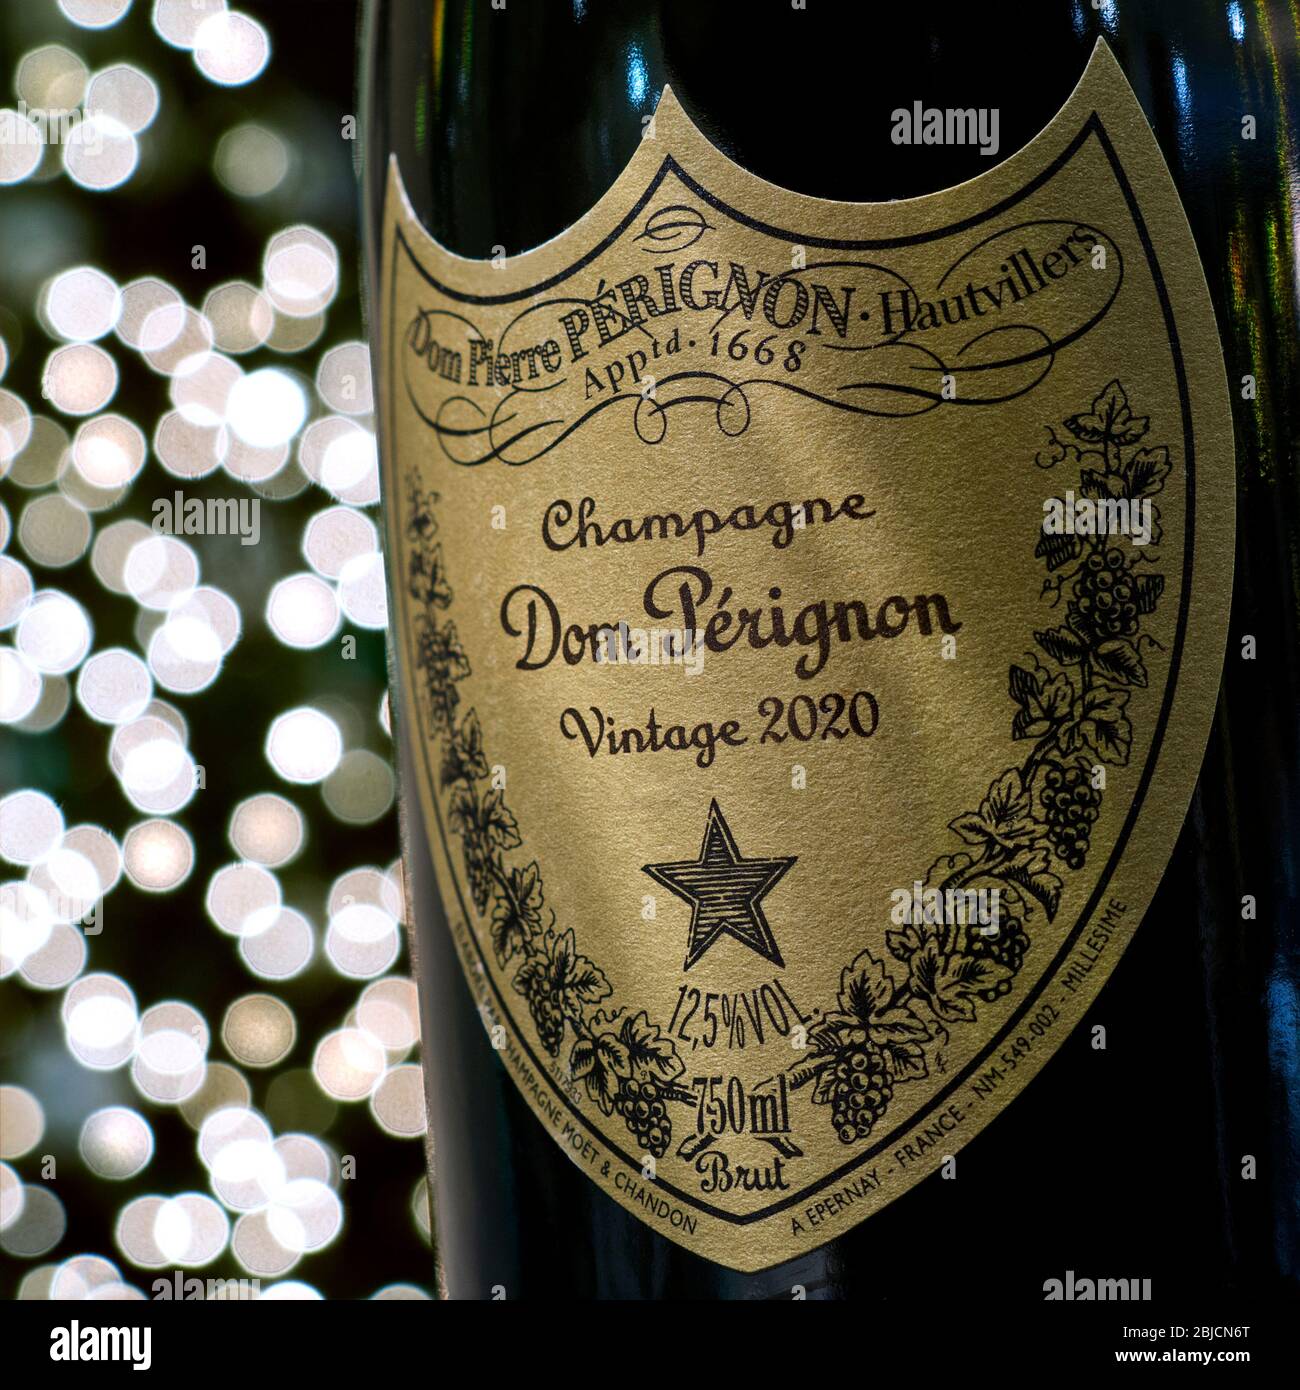 Dom Perignon Champagne bottle and label in party atmosphere with sparkling lights in background Concept label post-dated to Vintage  2020 celebration Stock Photo